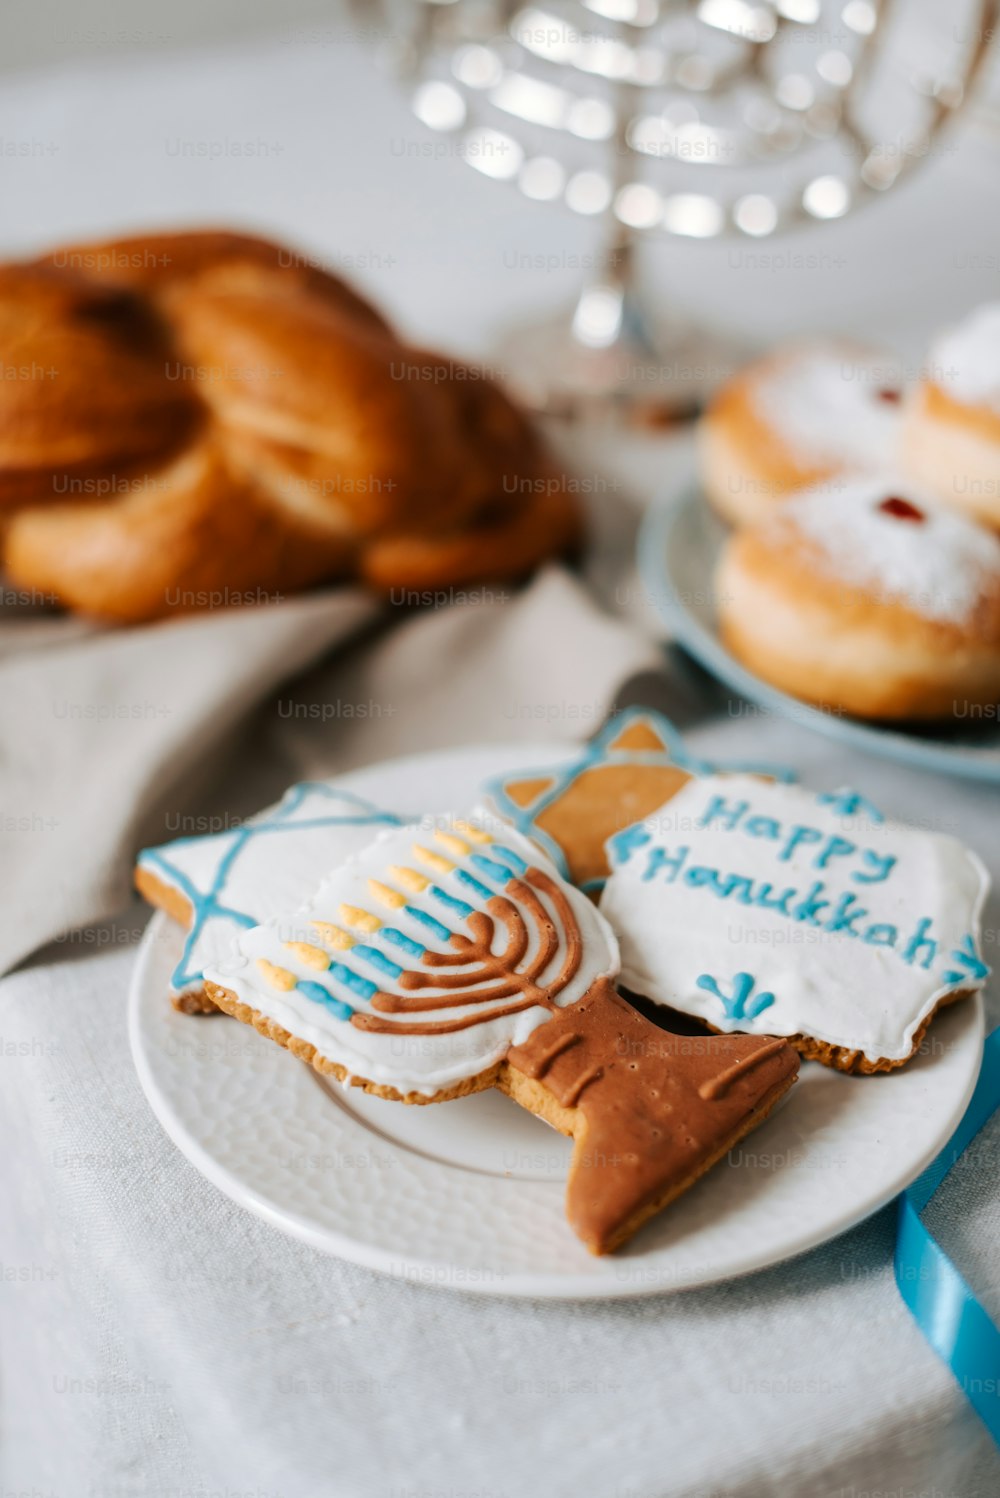 a plate of cookies and pastries on a table